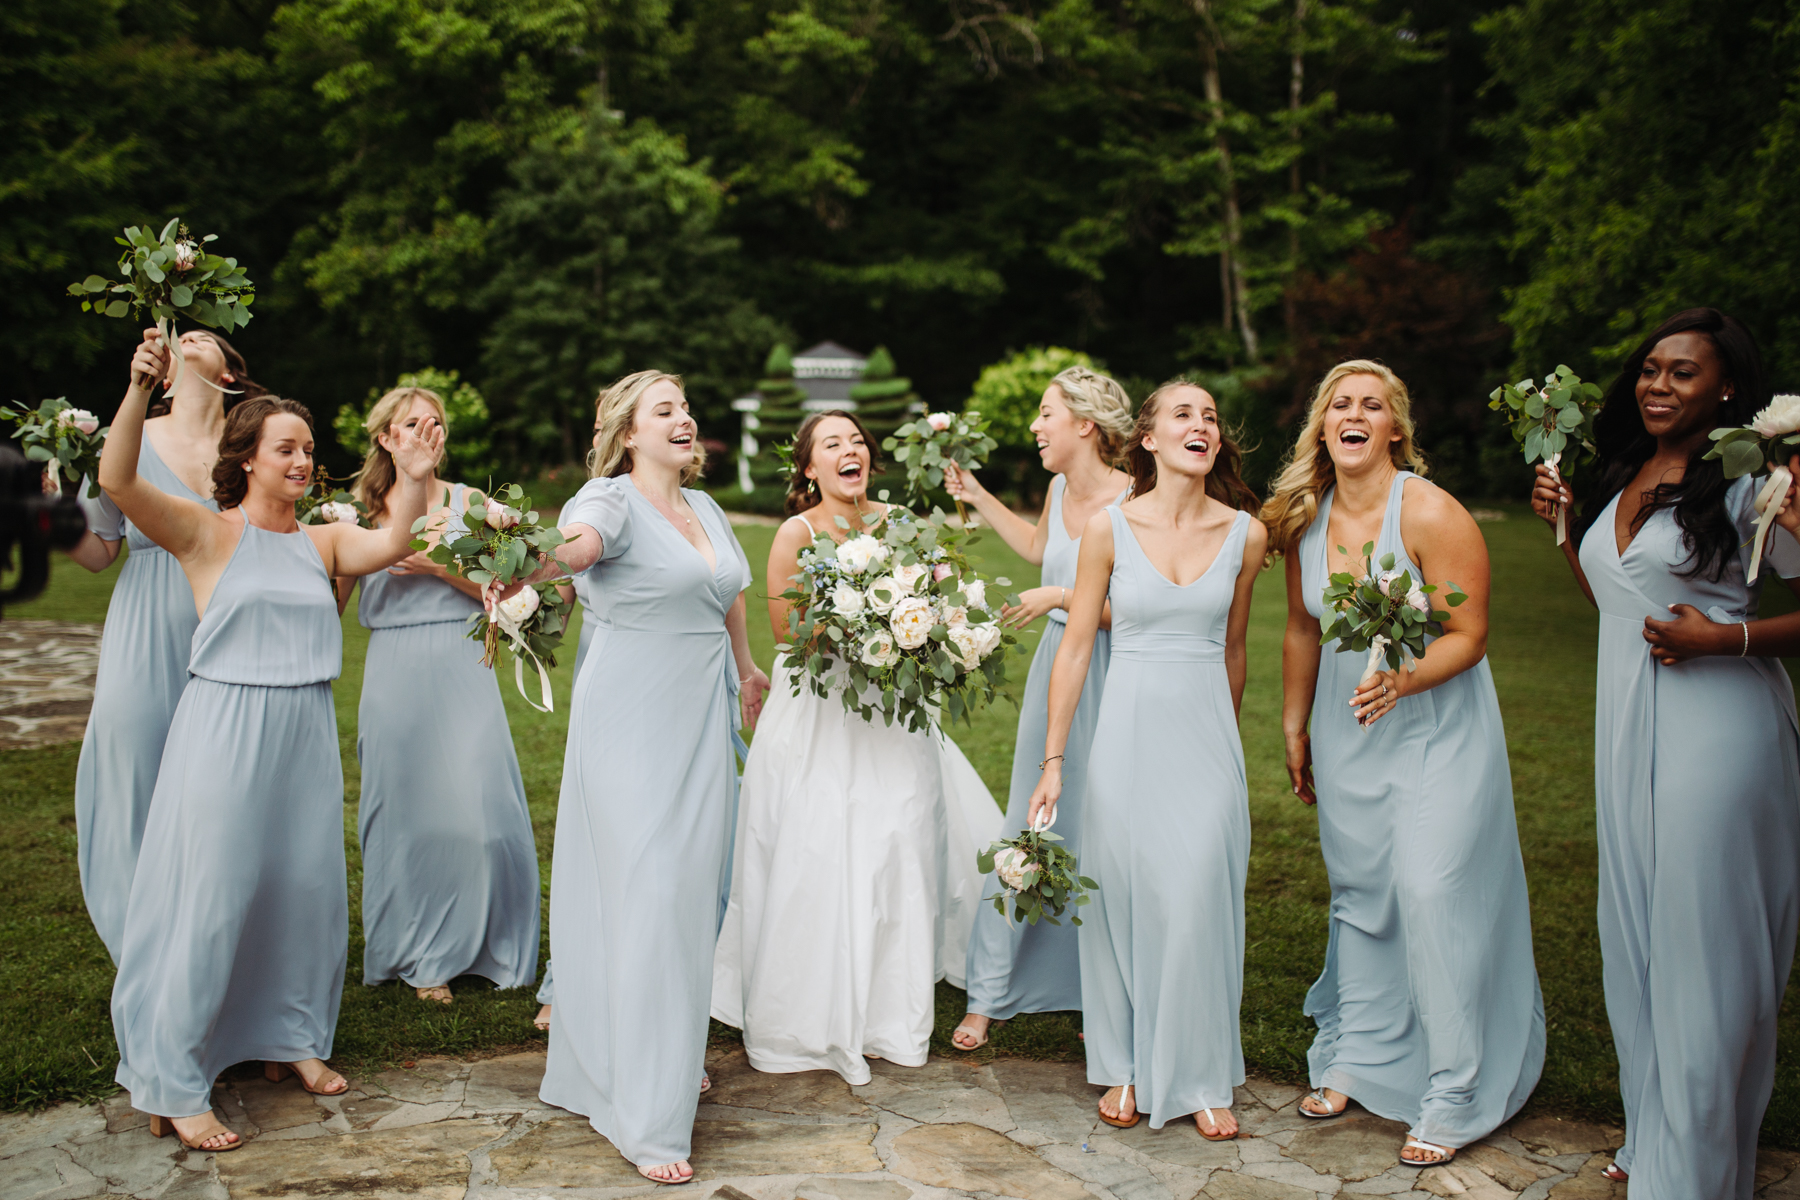 Bride and bridesmaid photos at a Sunny summer wedding at Dara's Garden in Knoxville, Tennessee 